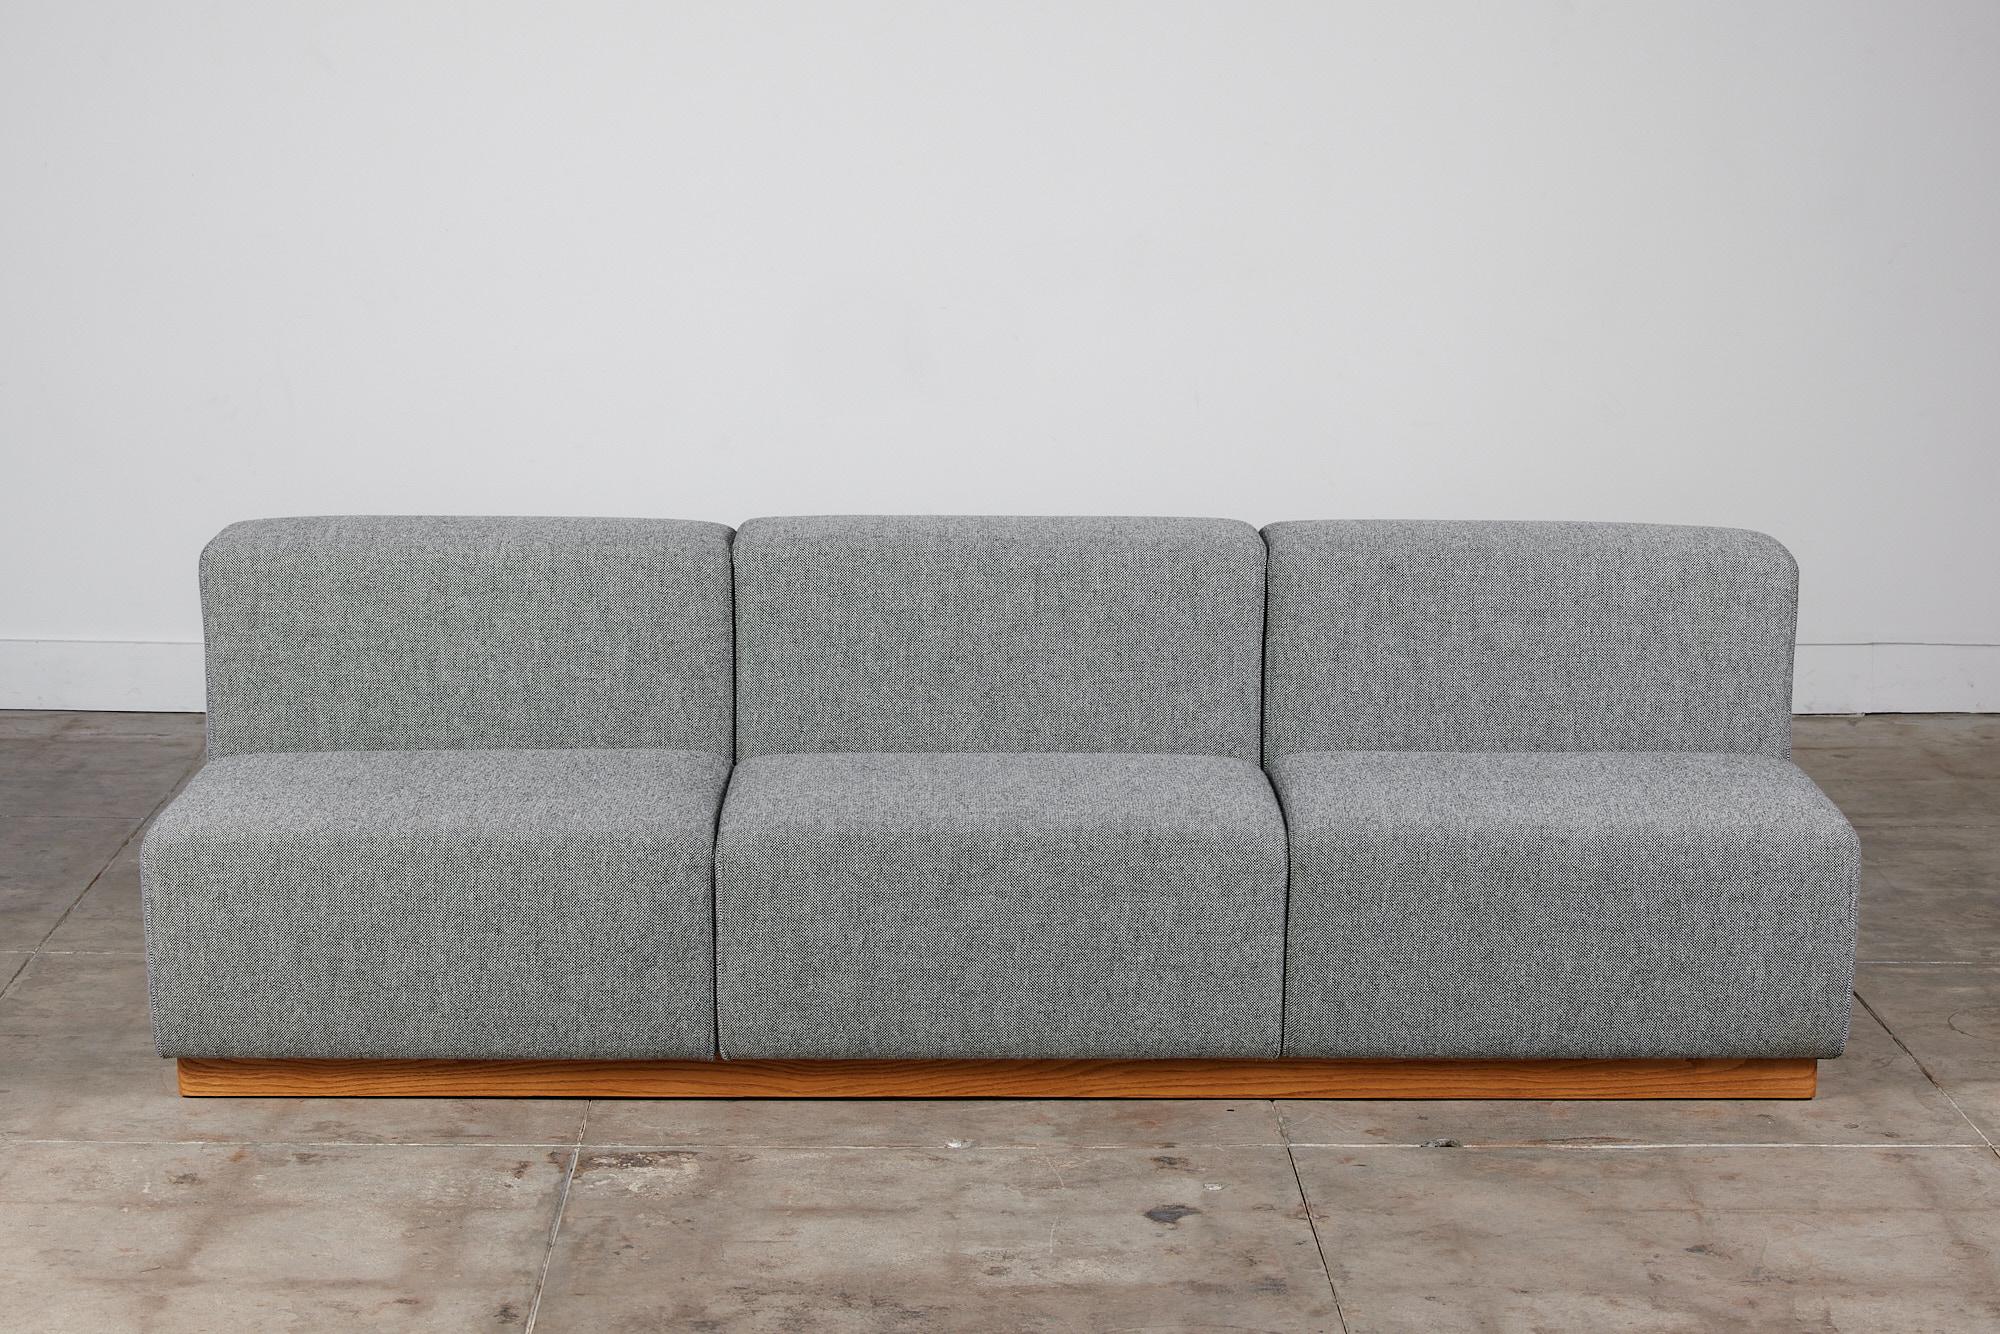 Modern cubic sofa in the style of Giancarlo Piretti. This sofa has been newly upholstered in Kvadrat fabric and features three seats with clean geometric lines. The sofa sits atop an oak plinth base. This semi modular sofa can be arranged with our